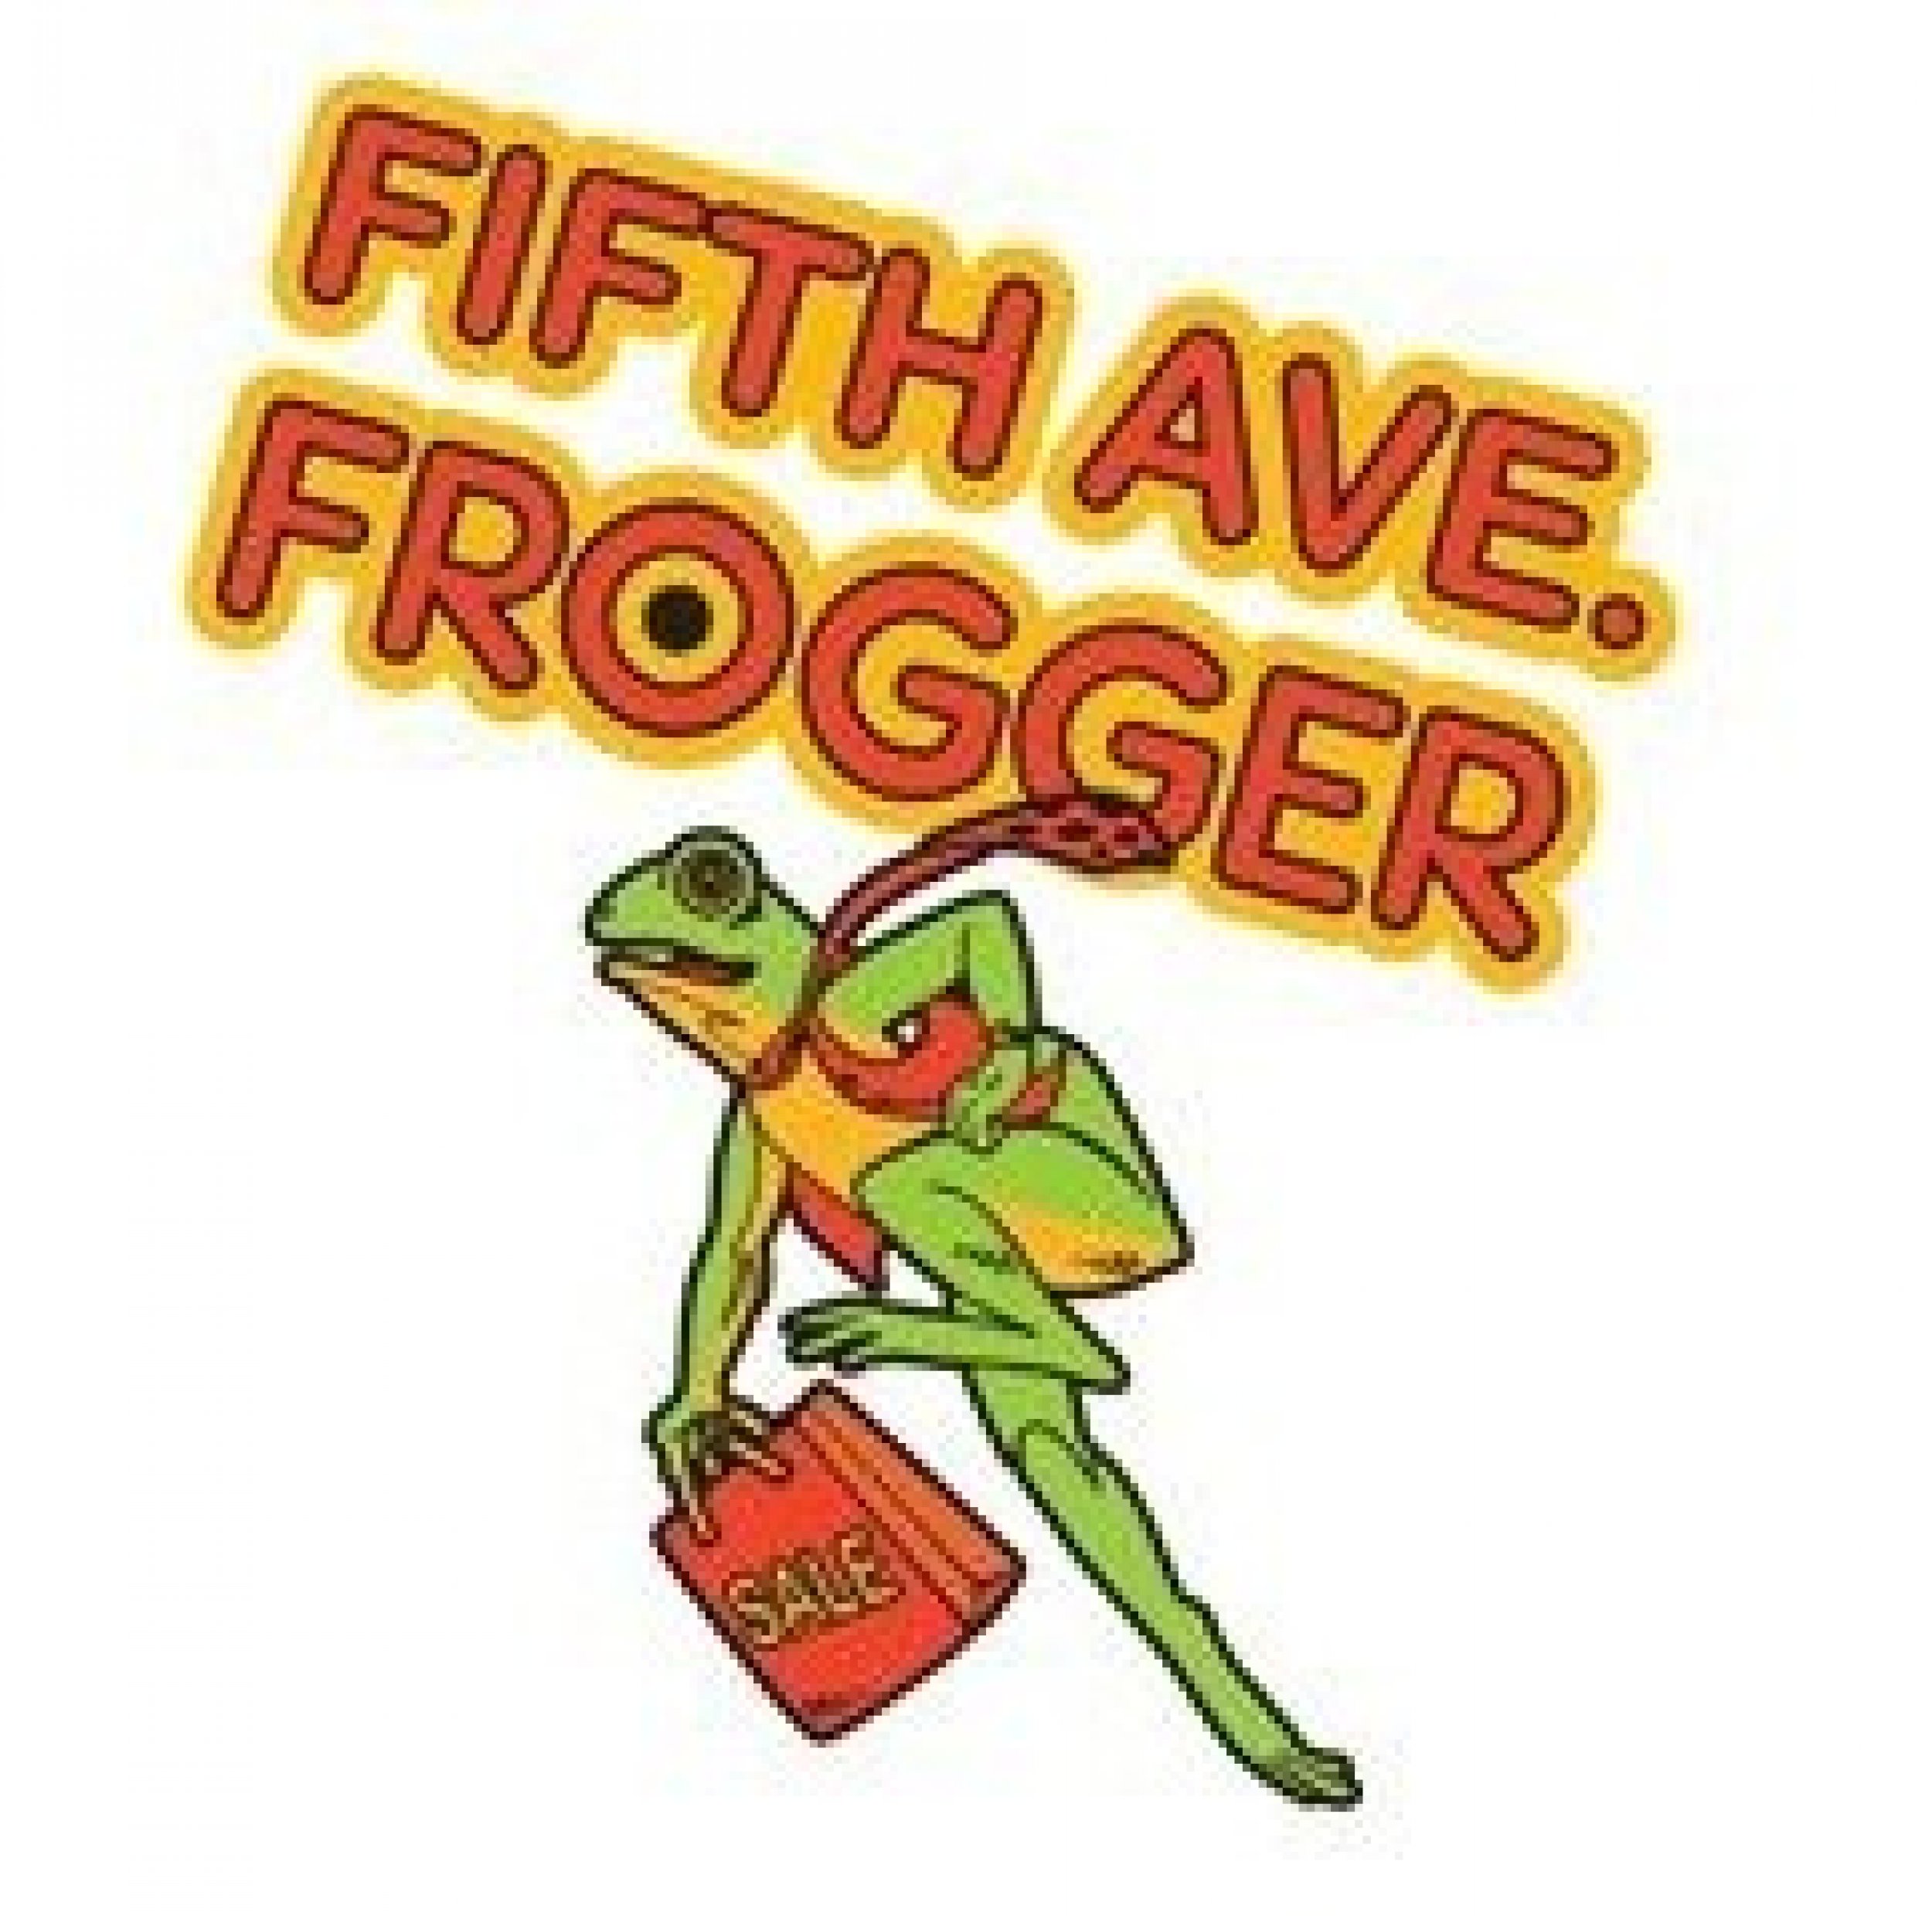 5th Ave Frogger - Real Cars, Real Time, Fake Frog, In New York City